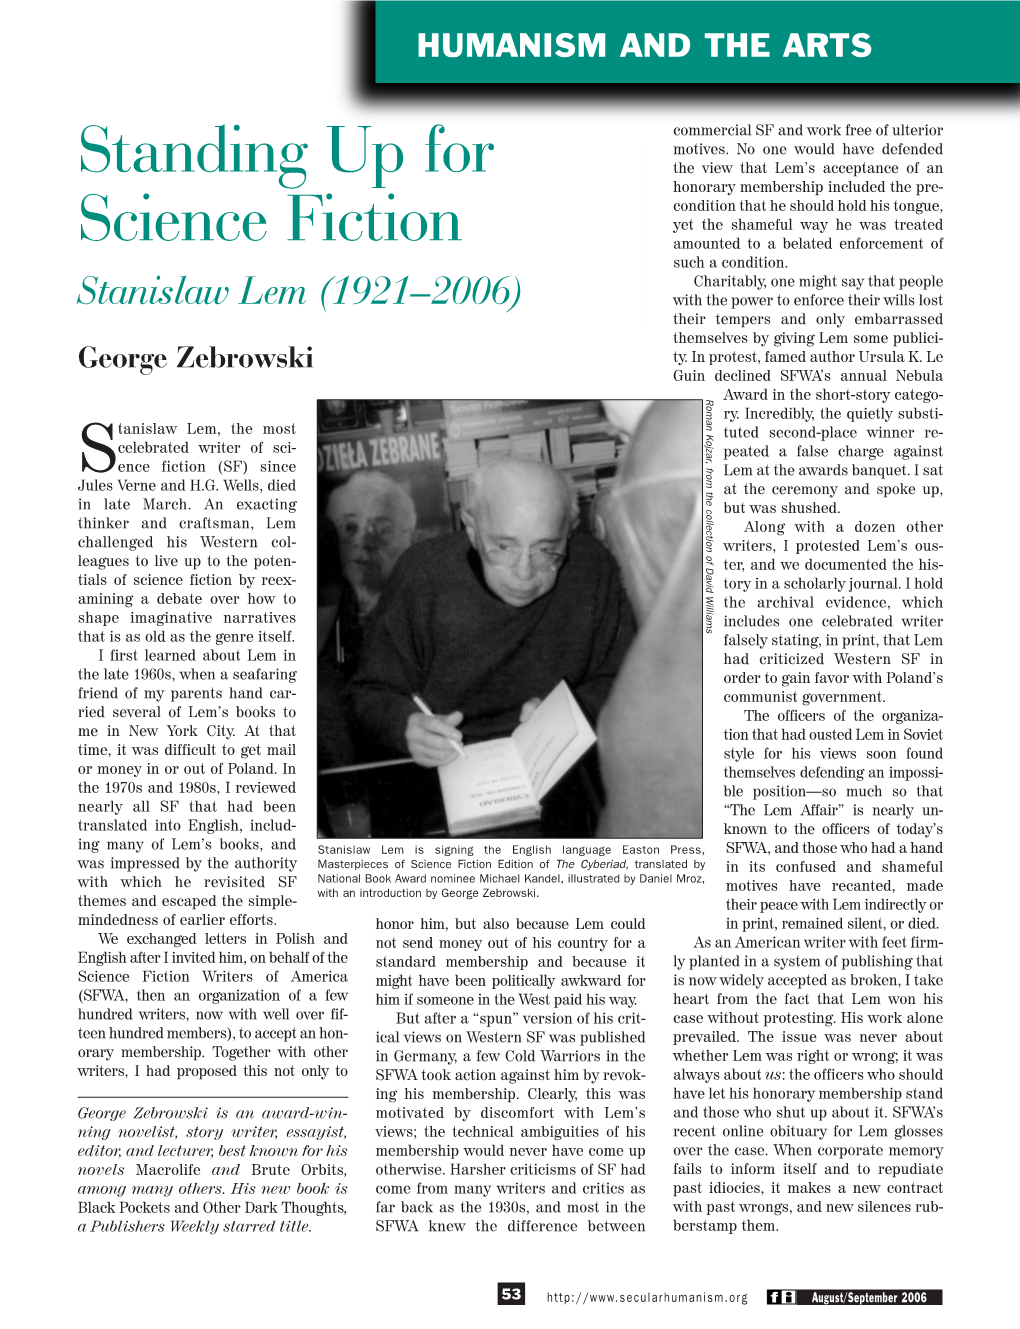 Standing up for Science Fiction